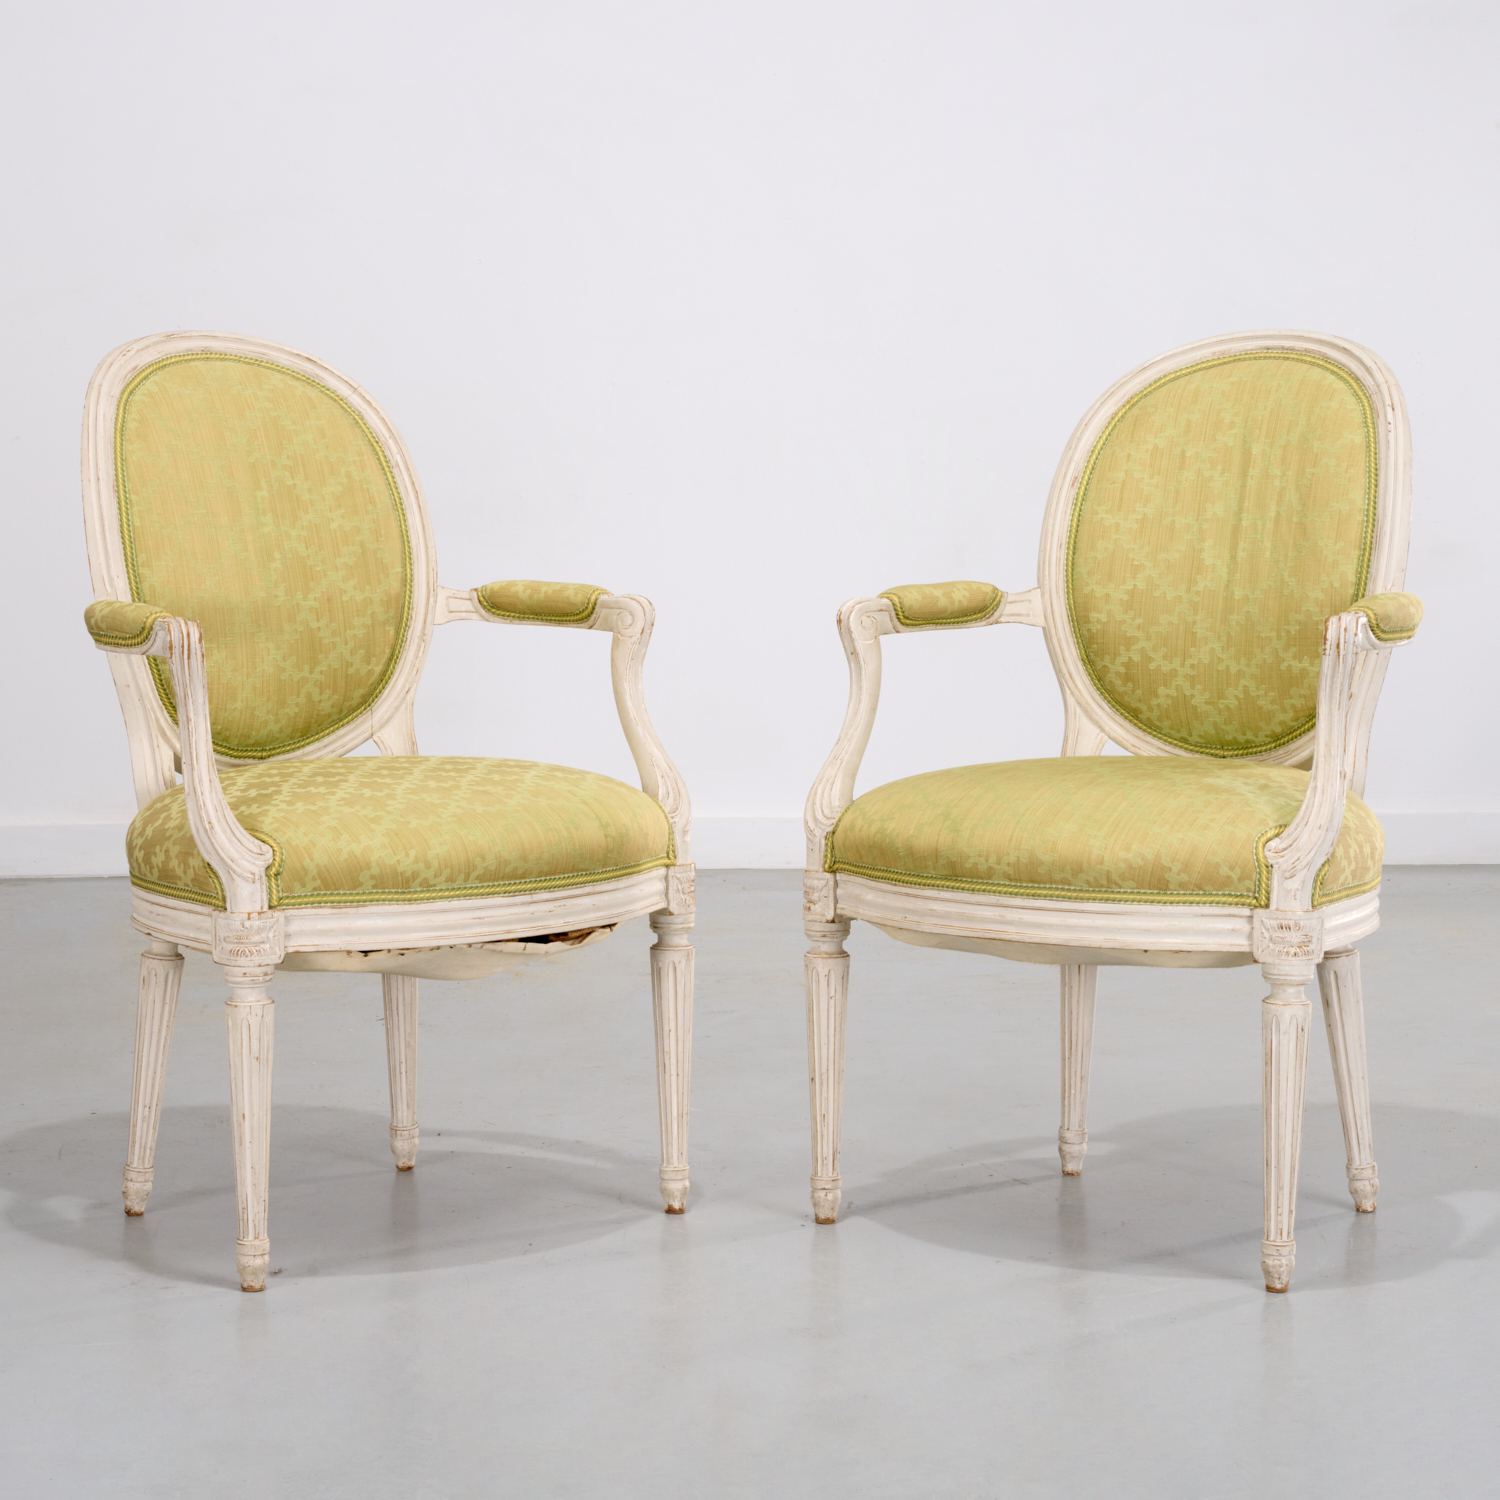 PAIR PAINTED FAUTEUILS SUPPLIED